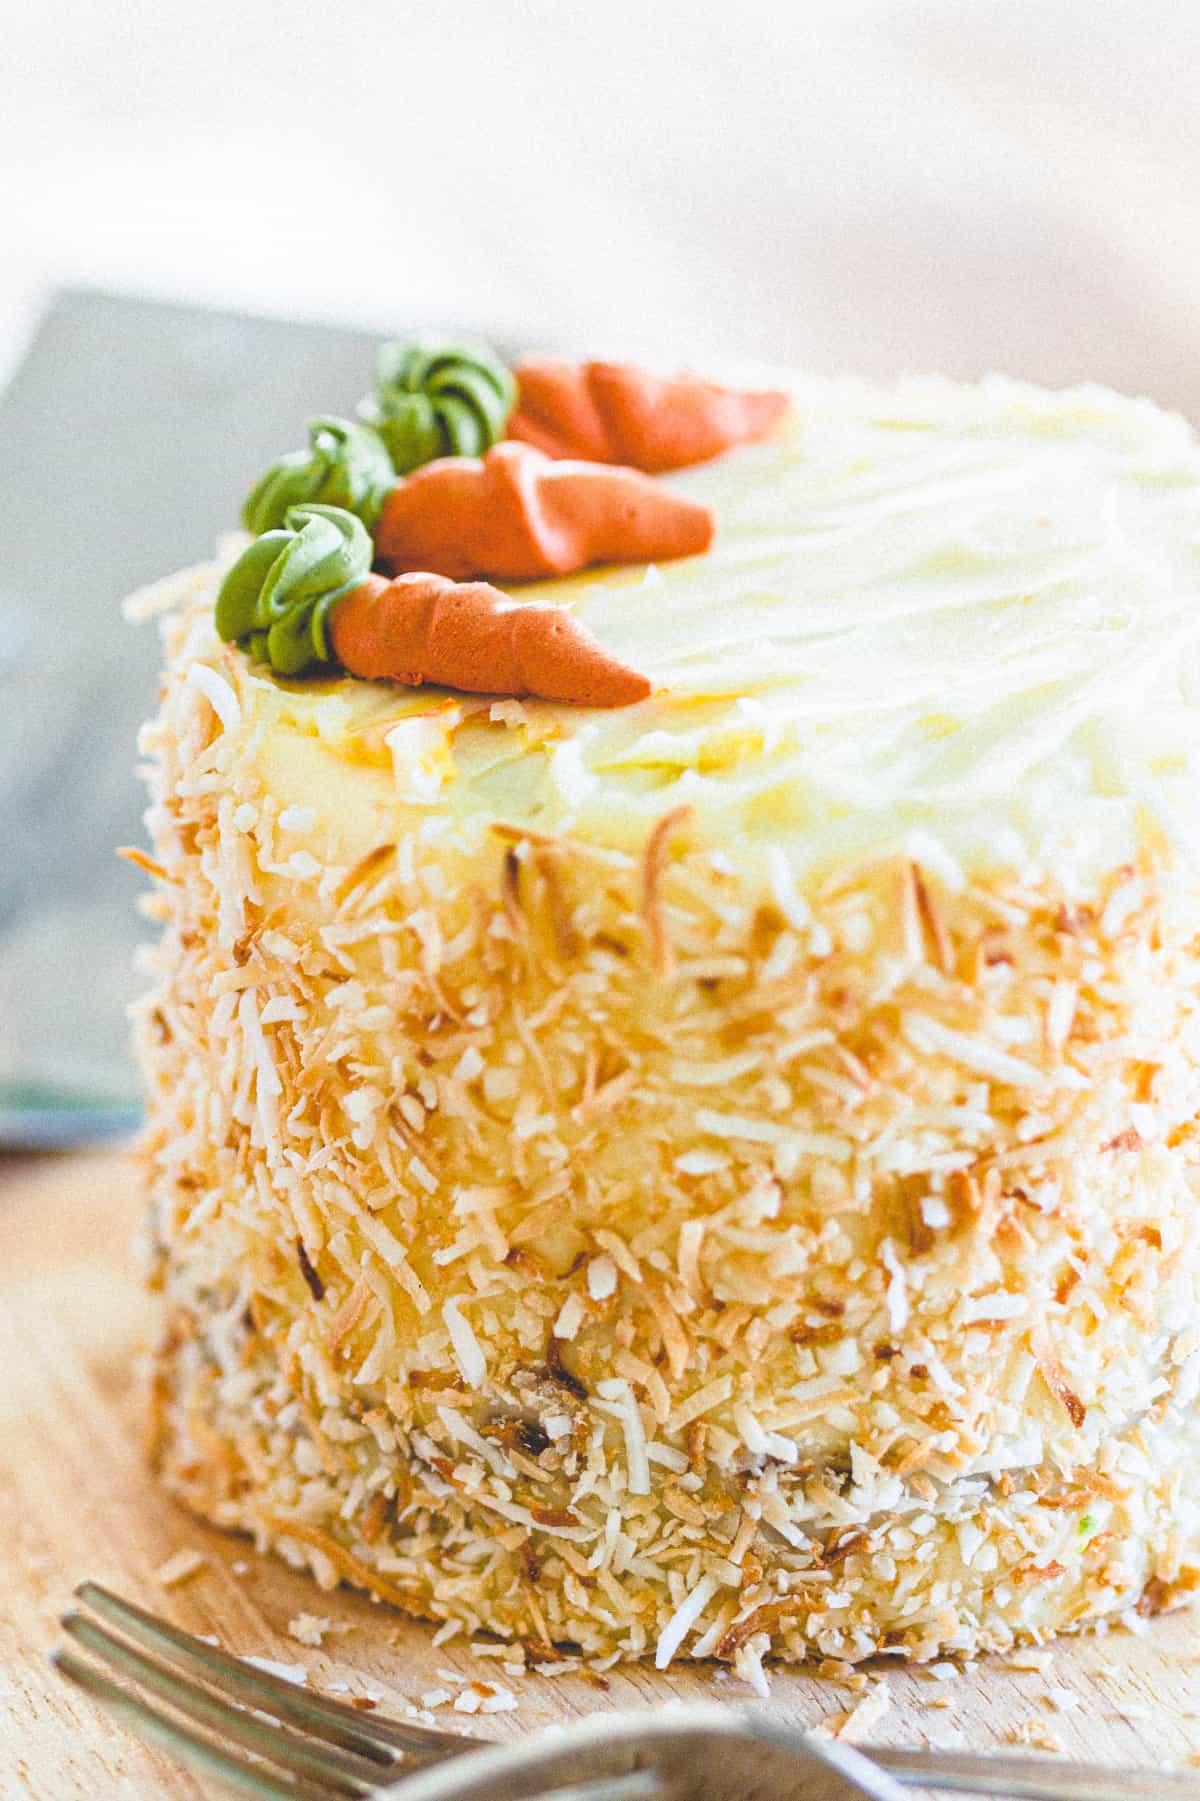 carrot cake with cream cheese frosting and toasted coconut on the sides.